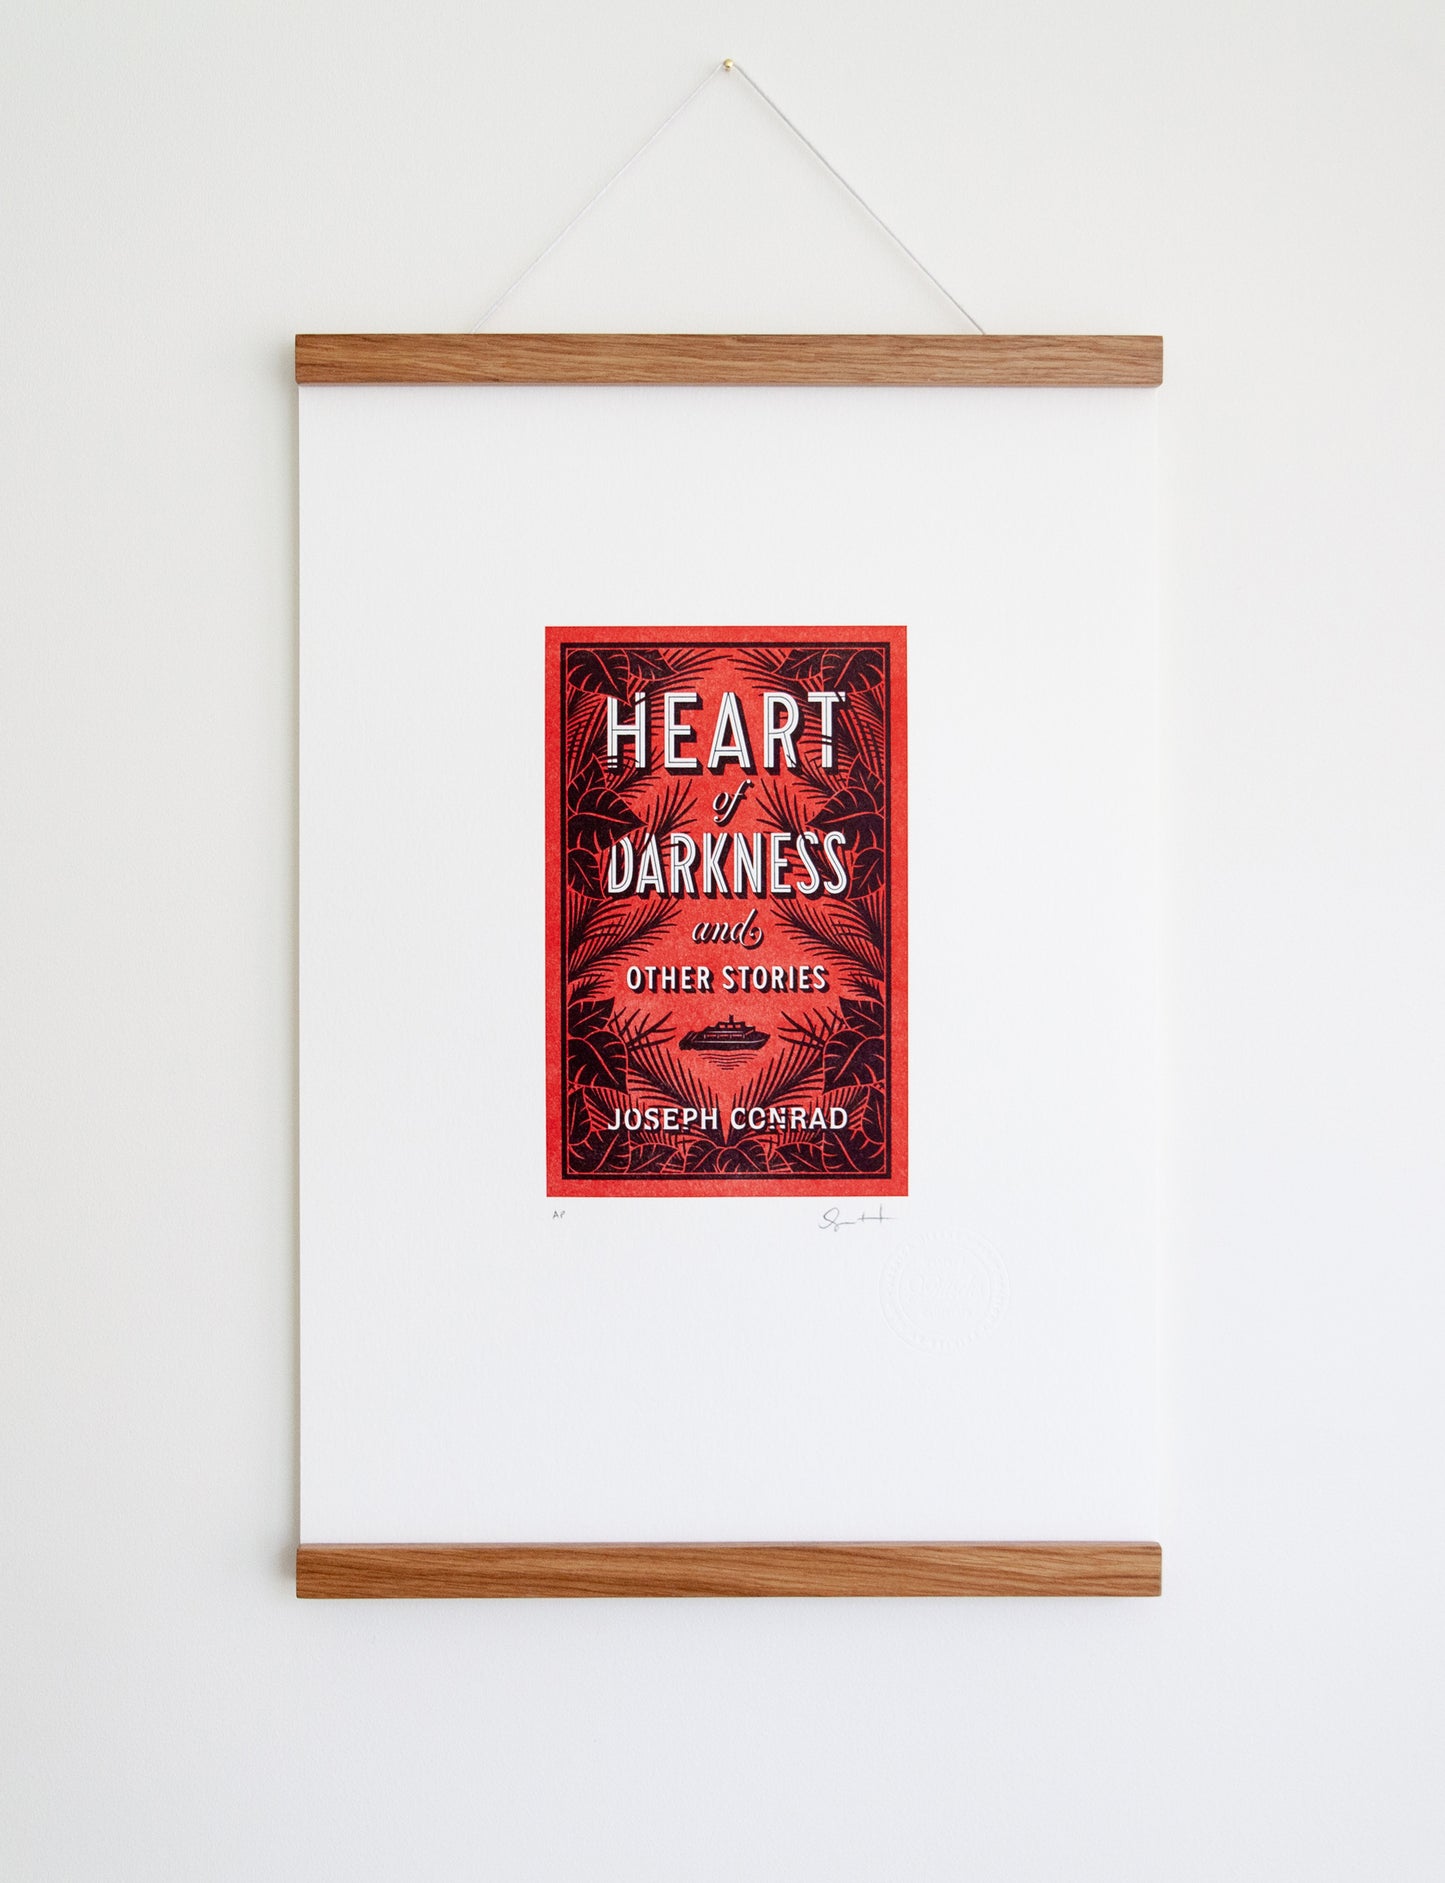 Framed 2-color letterpress print in red and black. Printed artwork is an illustrated book cover of Heart of Darkness including custom hand lettering.